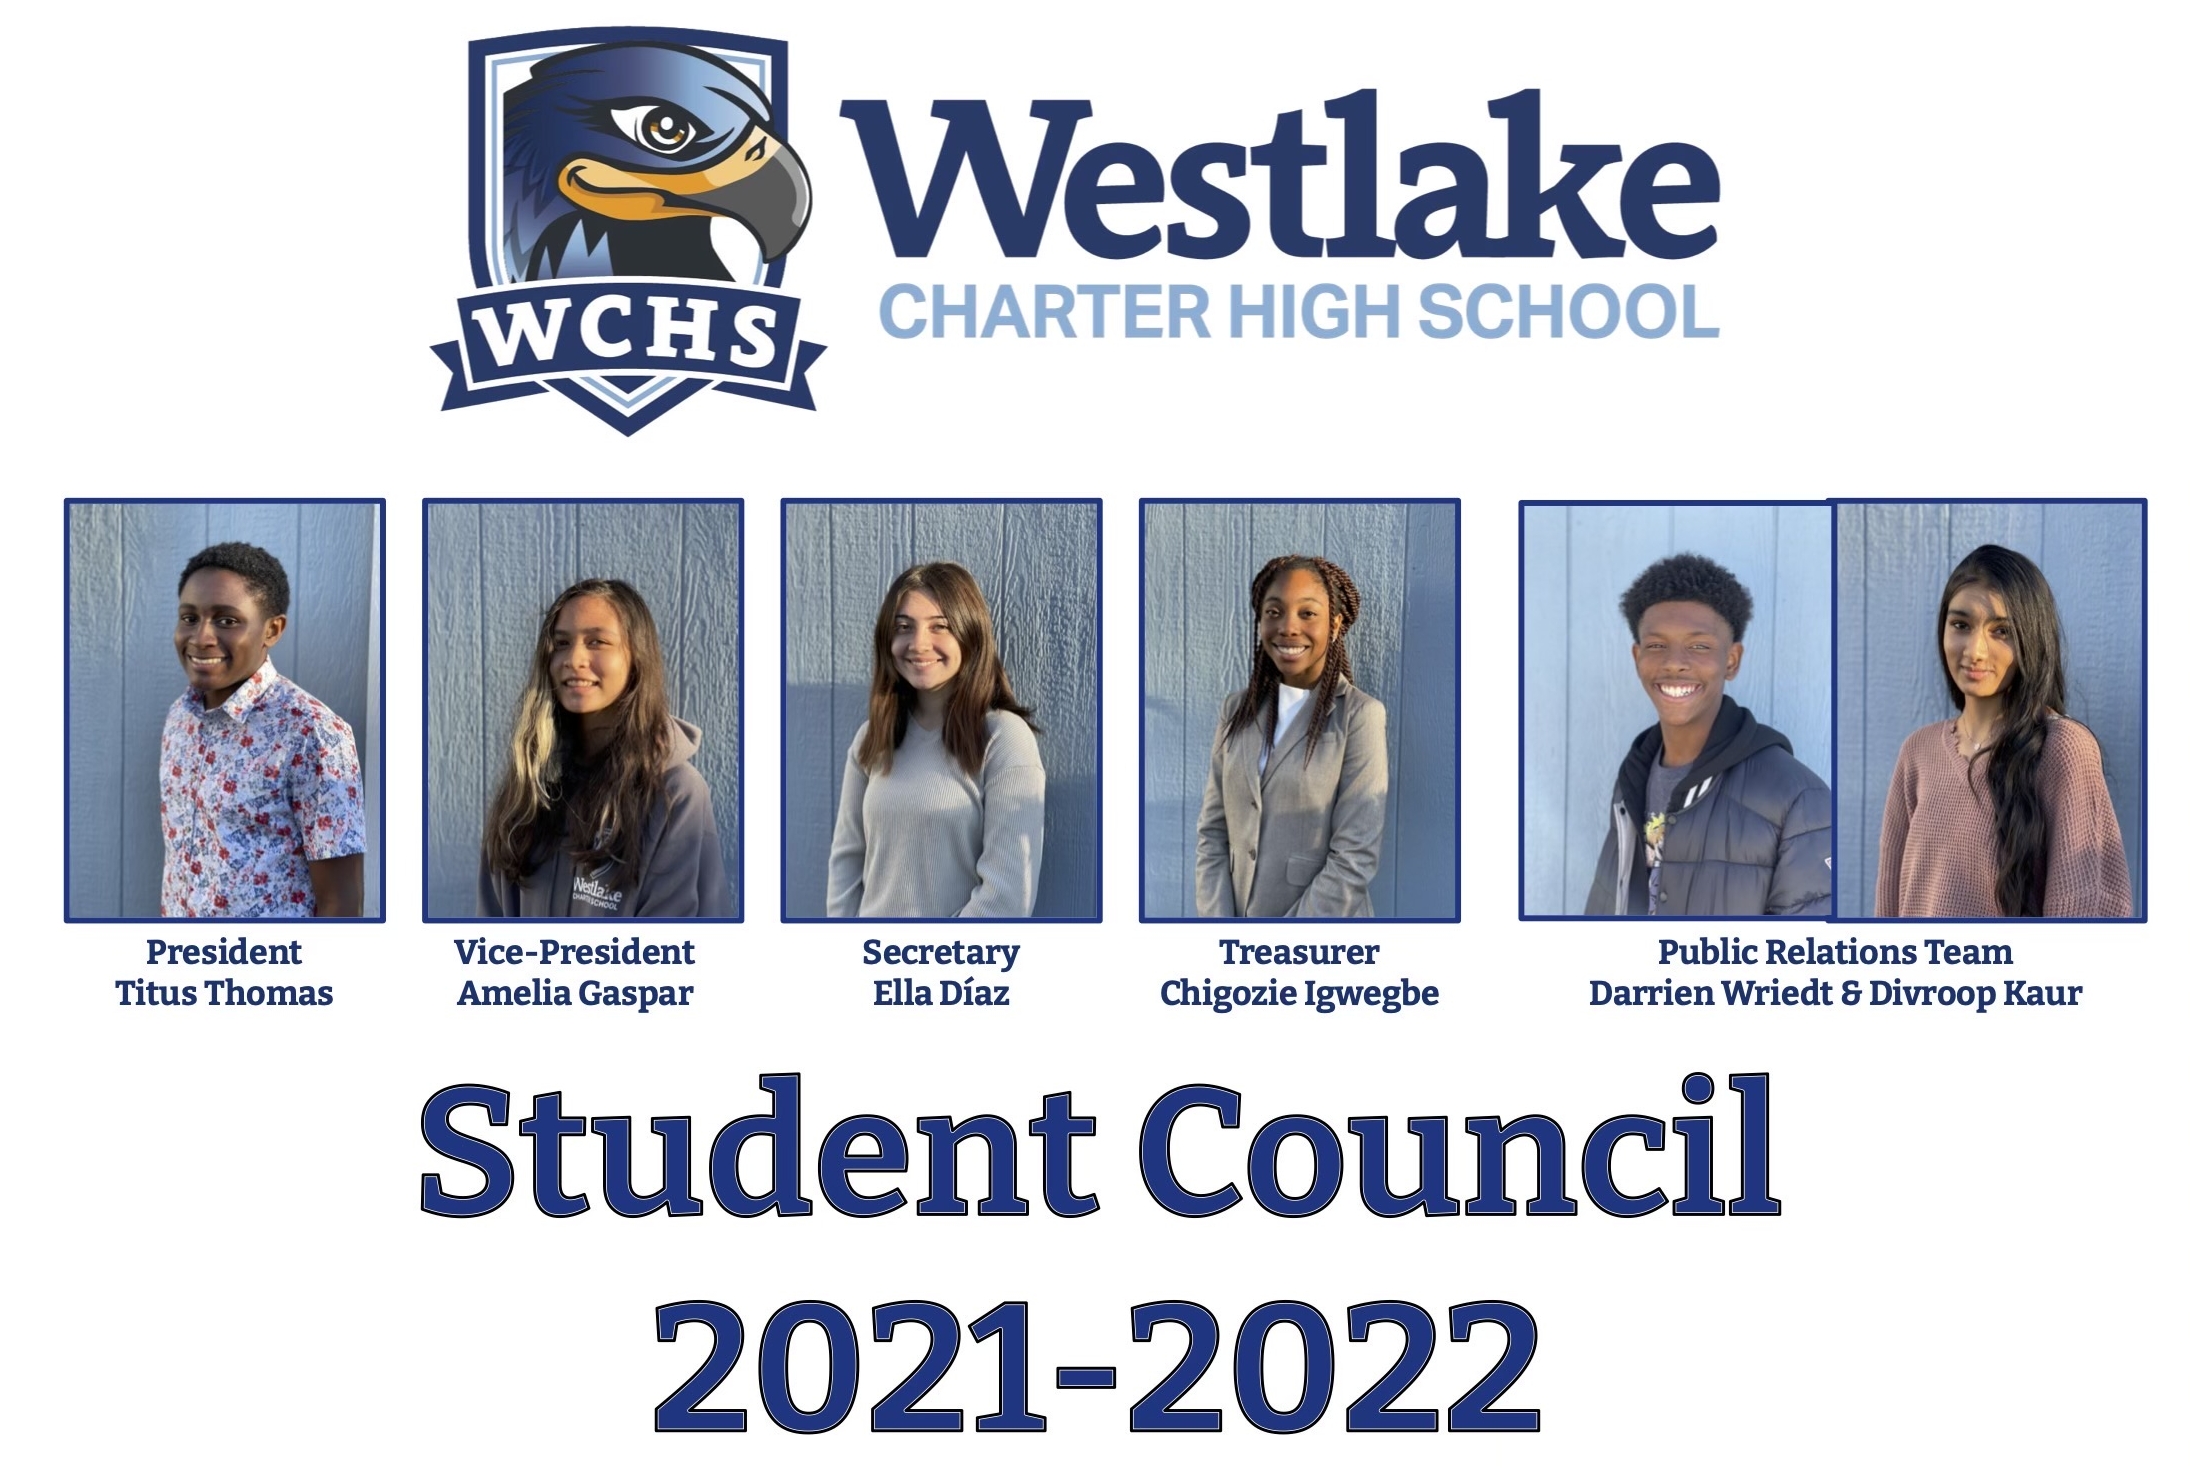 Our high school had their first Student Government Elections! Congratulations to every student who ran for a position! Introducing our founding WCHS Student Government: President: Titus Thomas, Vice President: Amelia Gaspar, Secretary: Ella Diaz, Treasurer: Chigozie Igwebe, Public Relations: Darrien Wriedt & Divroop Kaur